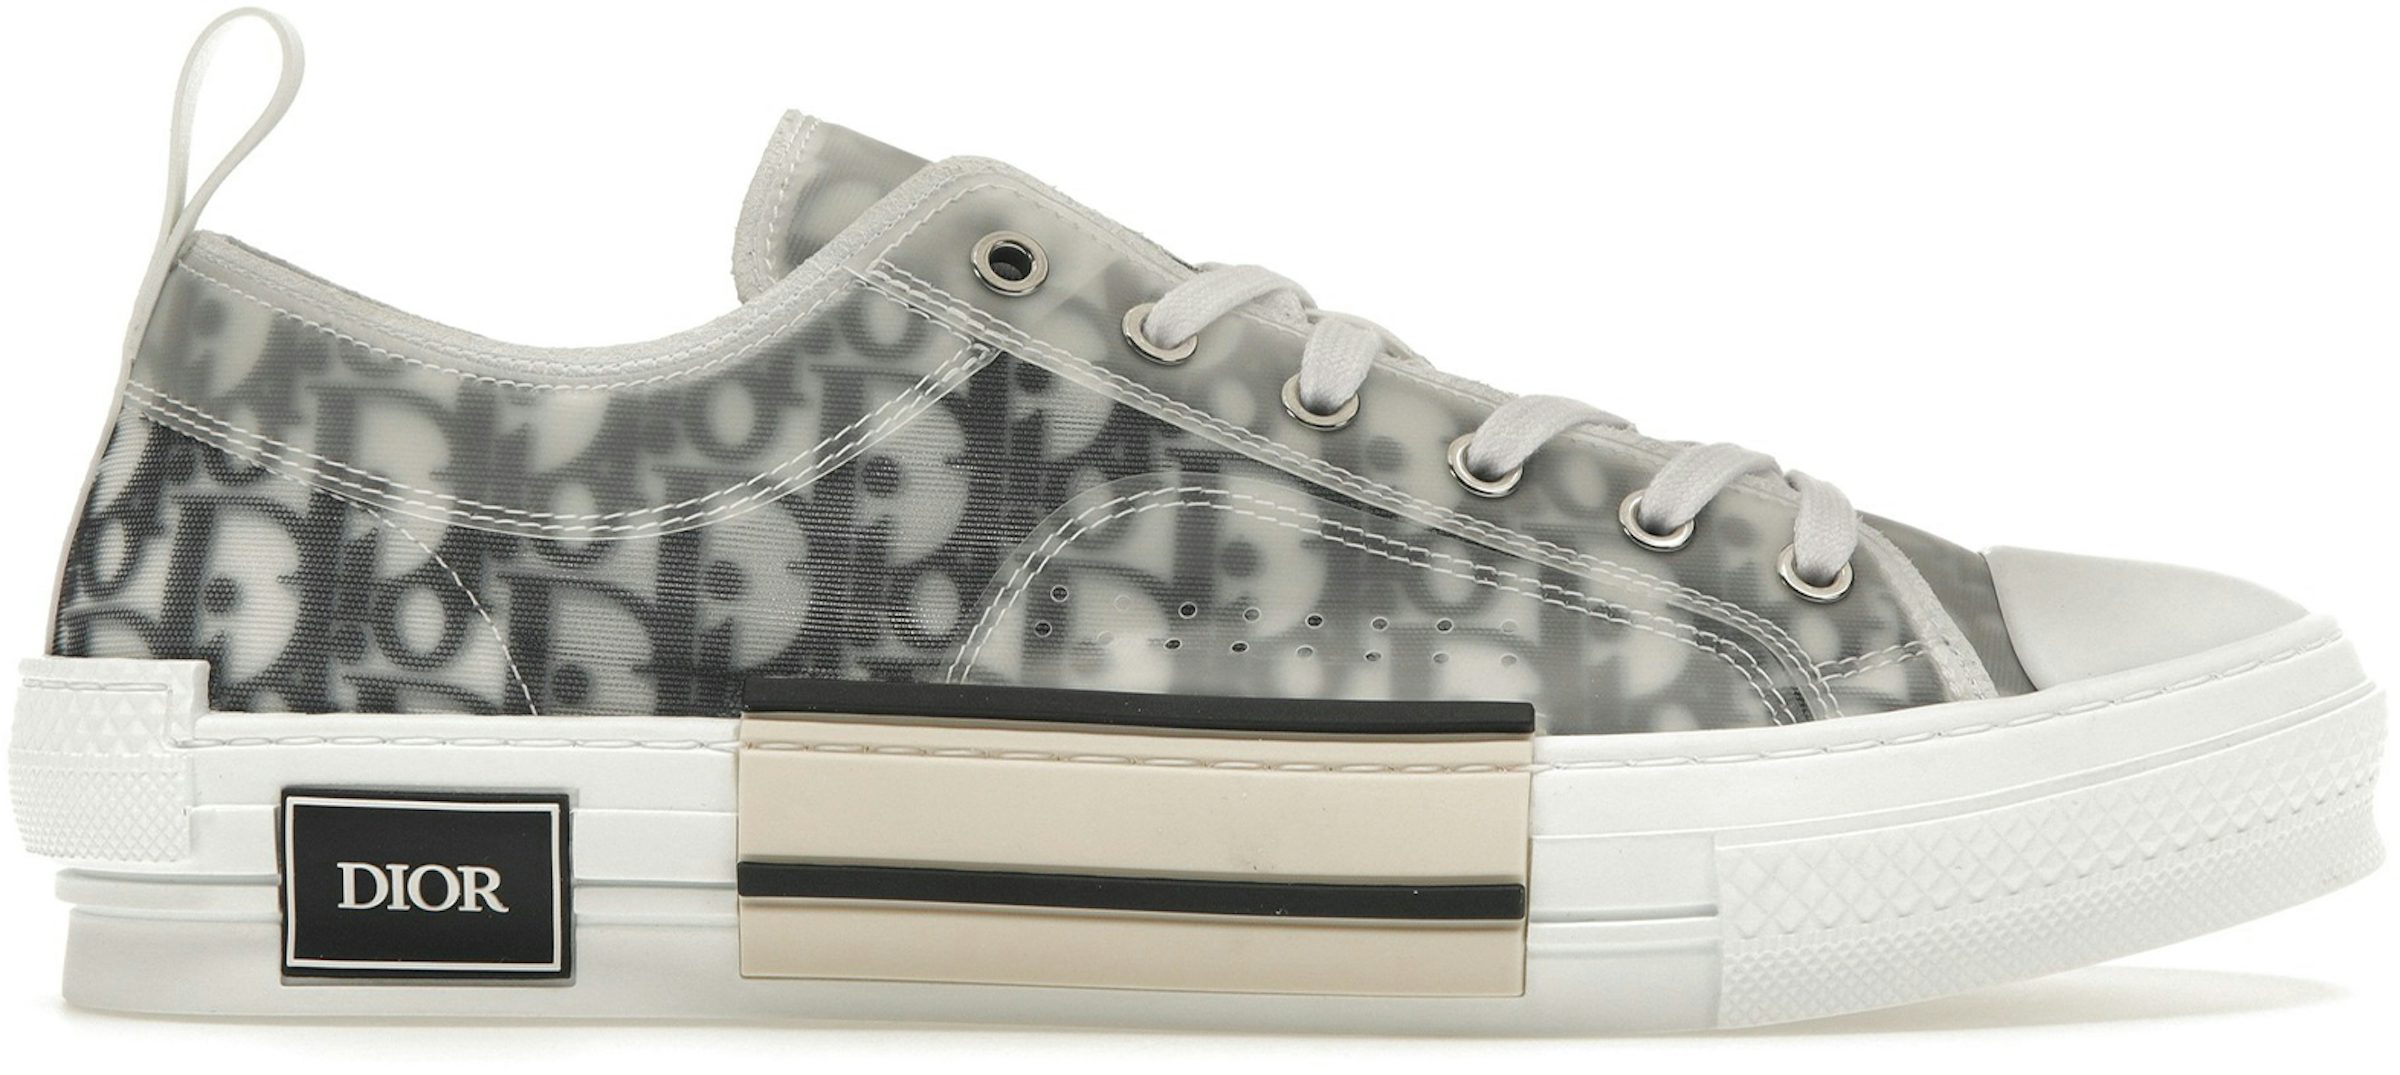 The magic of the Internet  Dior, Converse chuck taylor high top sneaker,  Sneakers